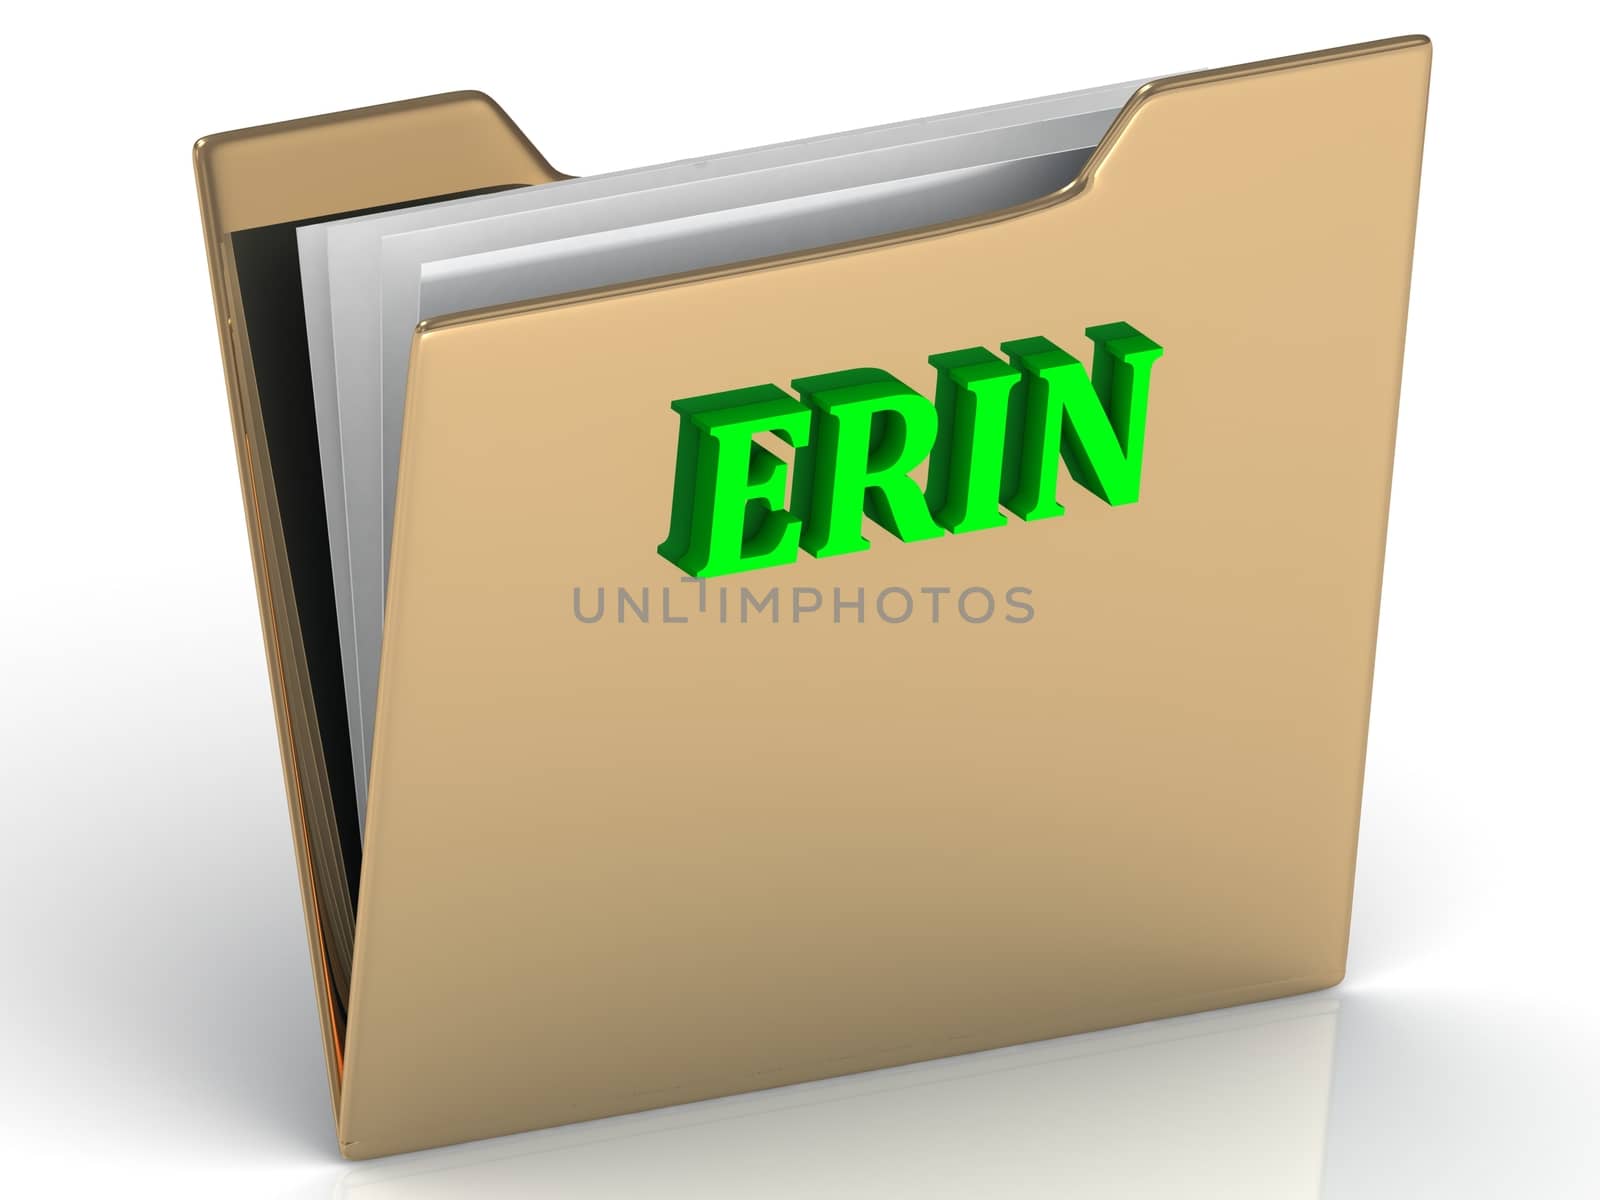 ERIN- bright green letters on gold paperwork folder by GreenMost